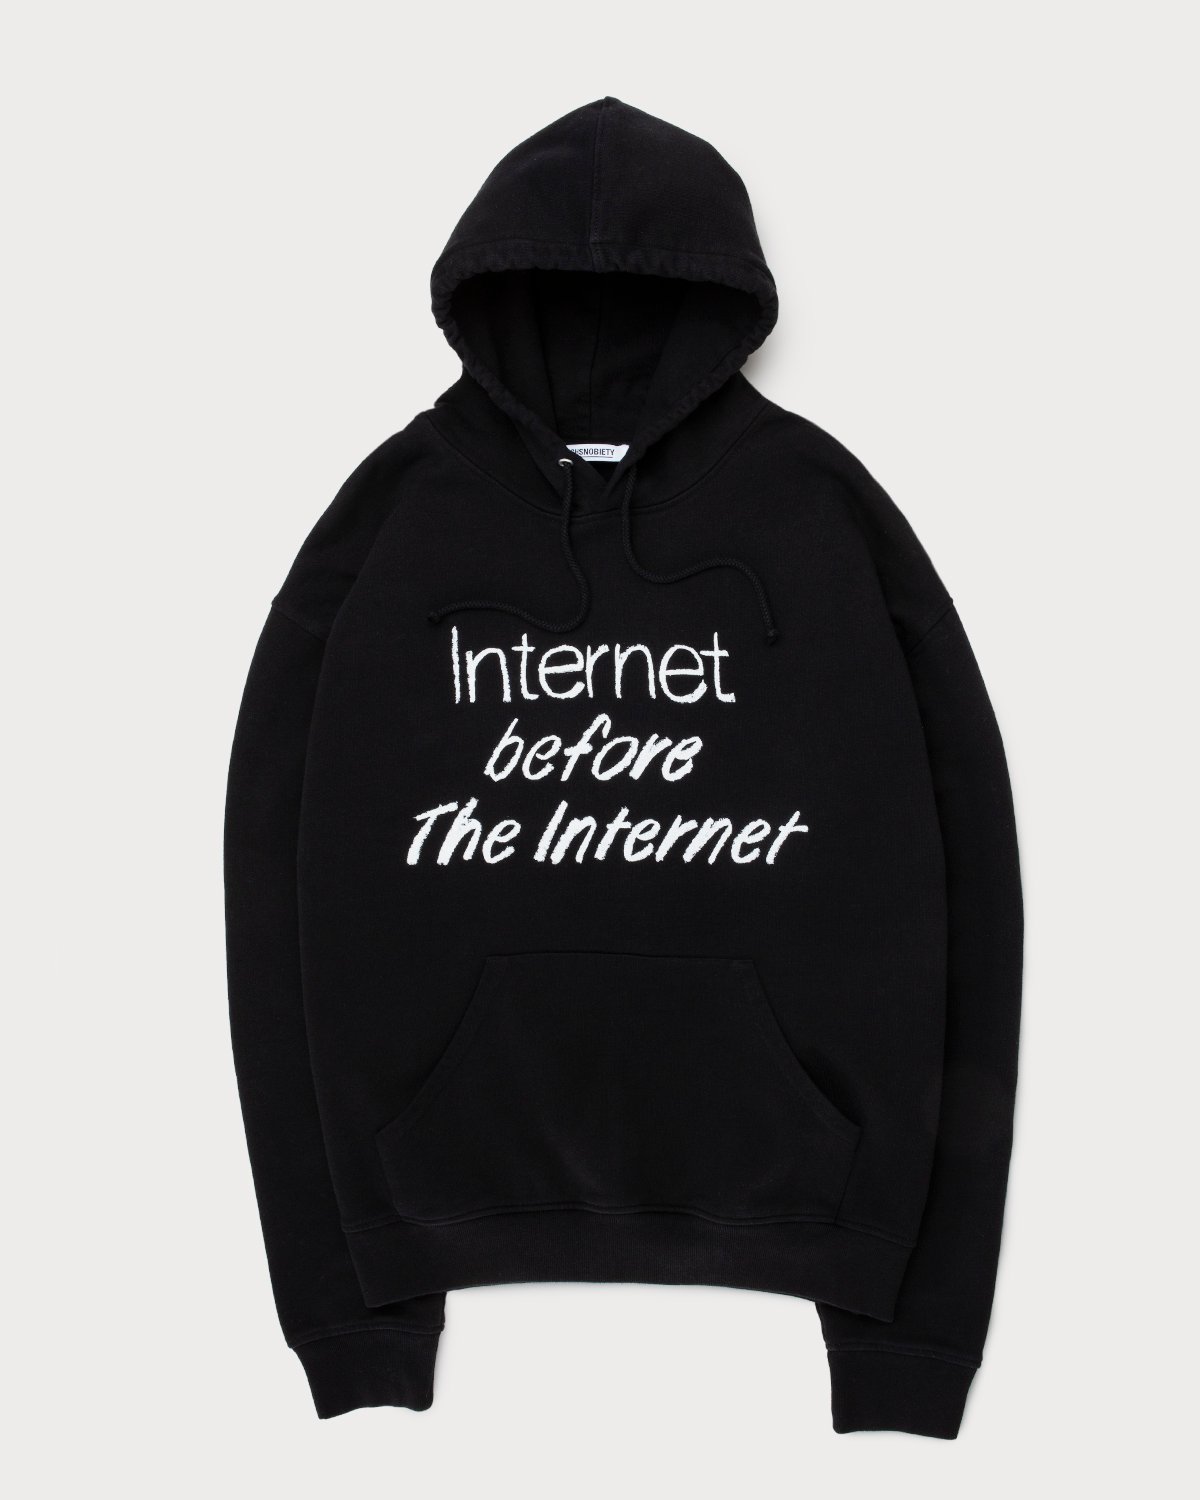 Colette Mon Amour - The Internet Before The Internet Hoodie Black - Clothing - Black - Image 1